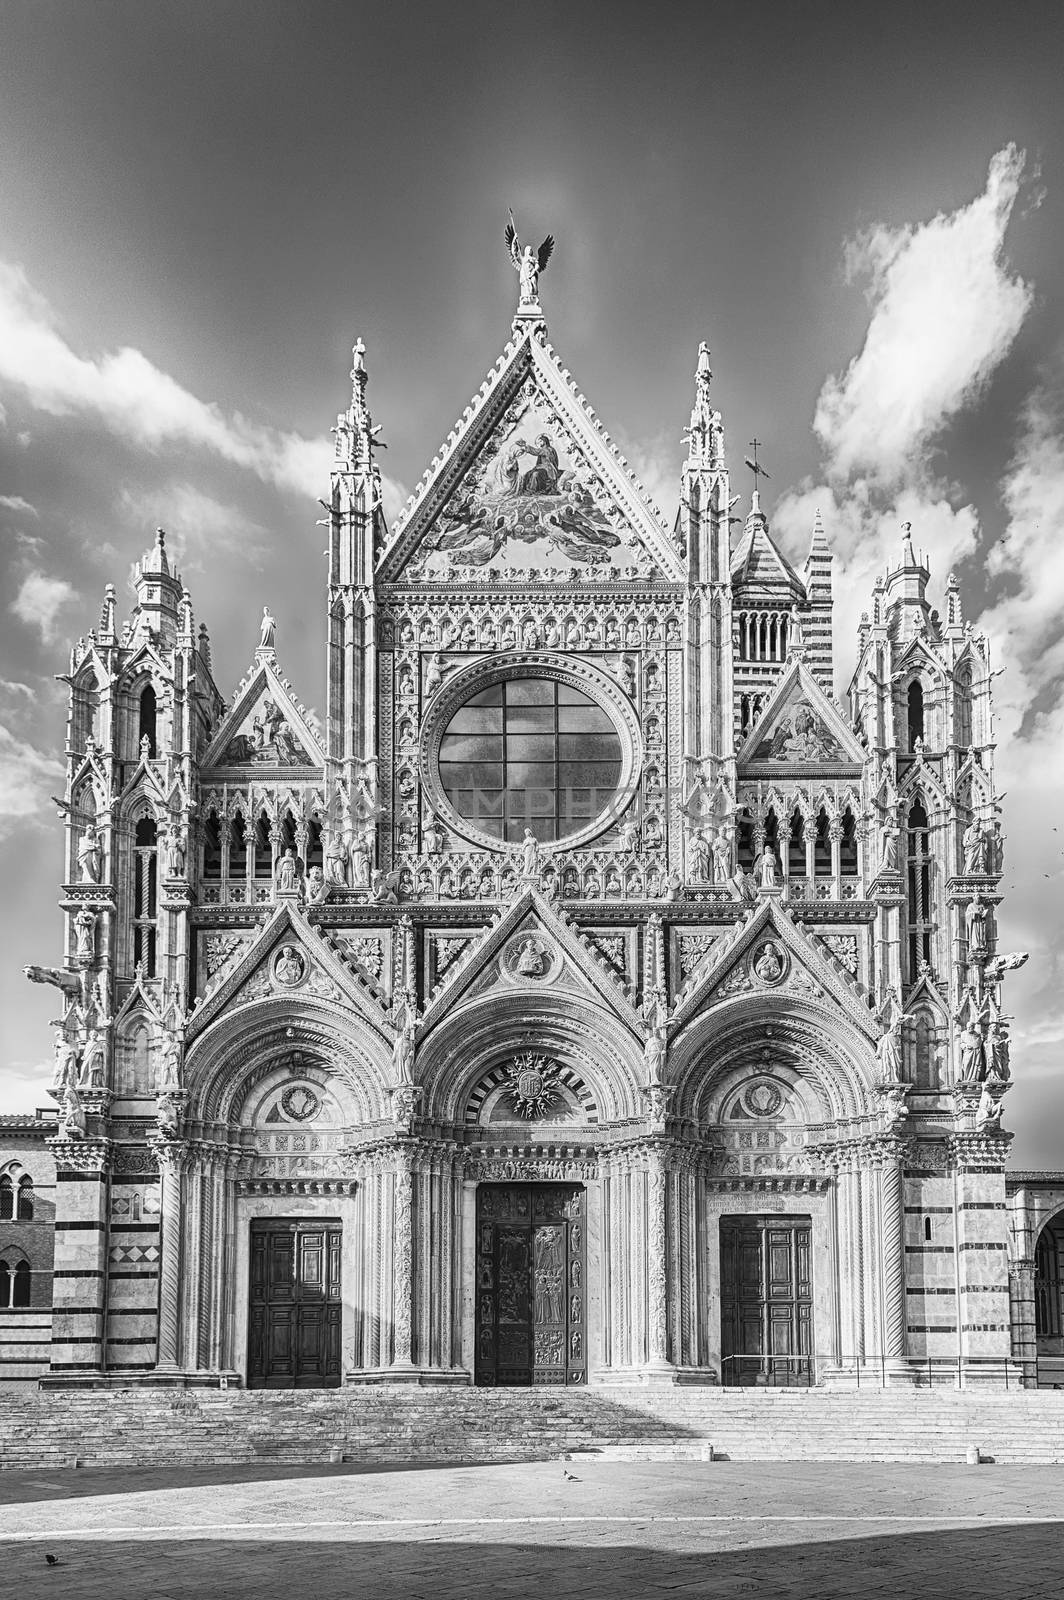 View of the facade of the gothic Cathedral of Siena, Tuscany, Italy. Completed in 1348, the church is dedicated to the Assumption of Mary and it is one of the most visited sightseeing of Siena